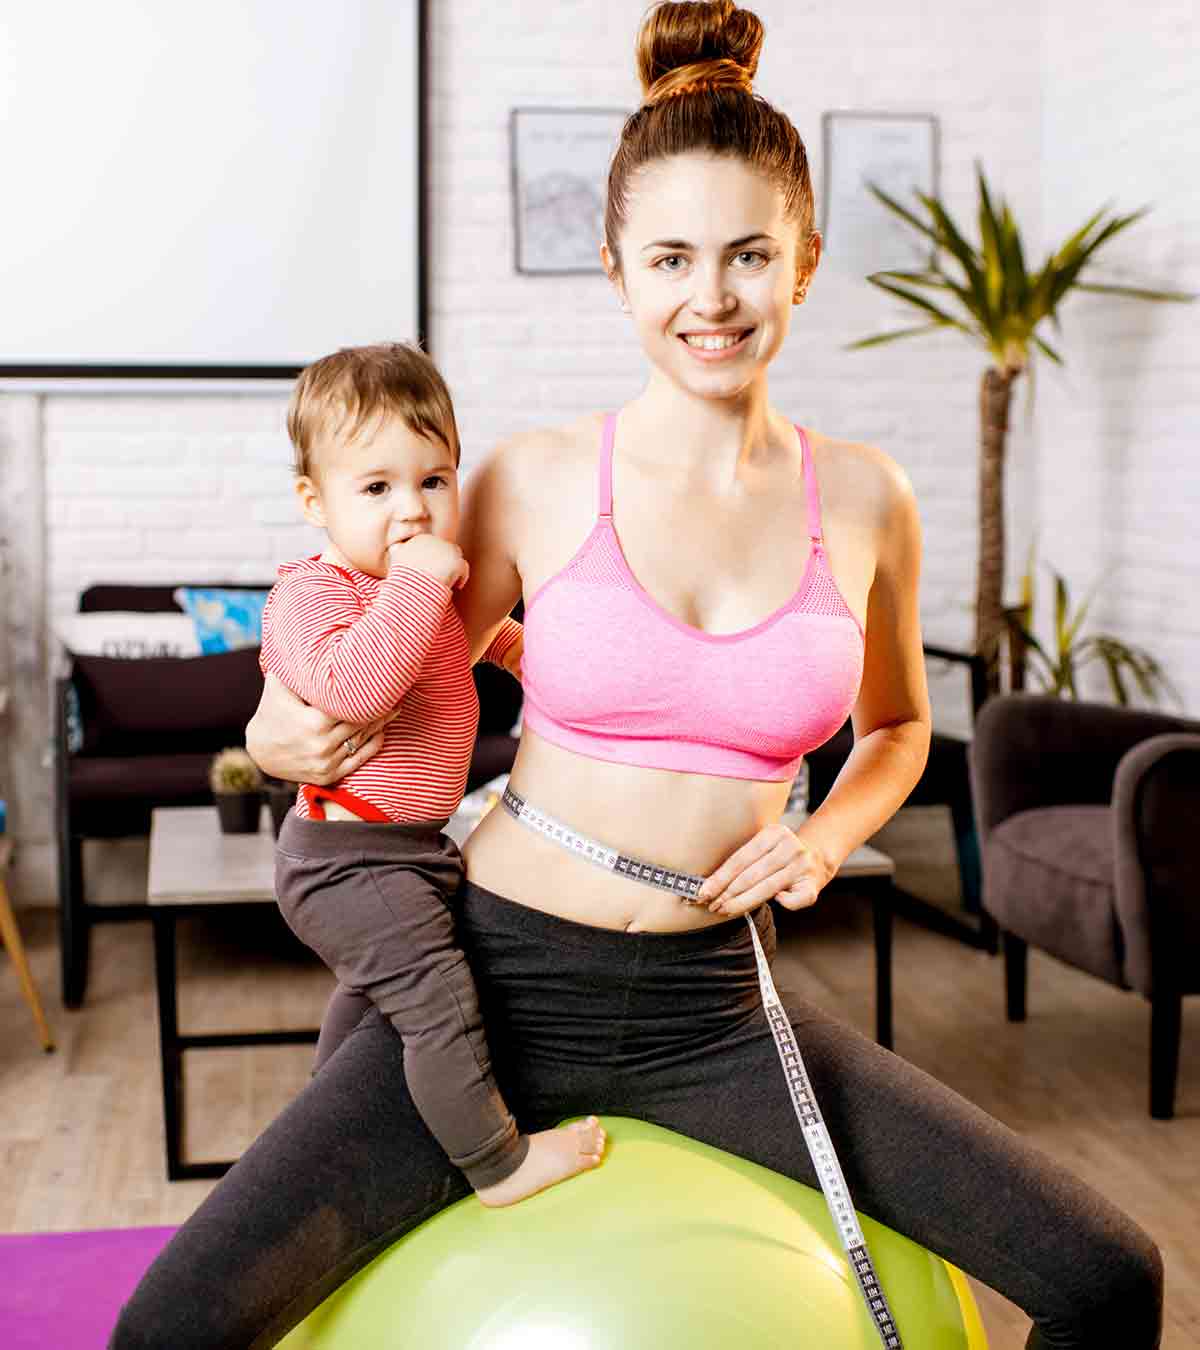 How To Lose Baby Weight After Pregnancy Naturally?